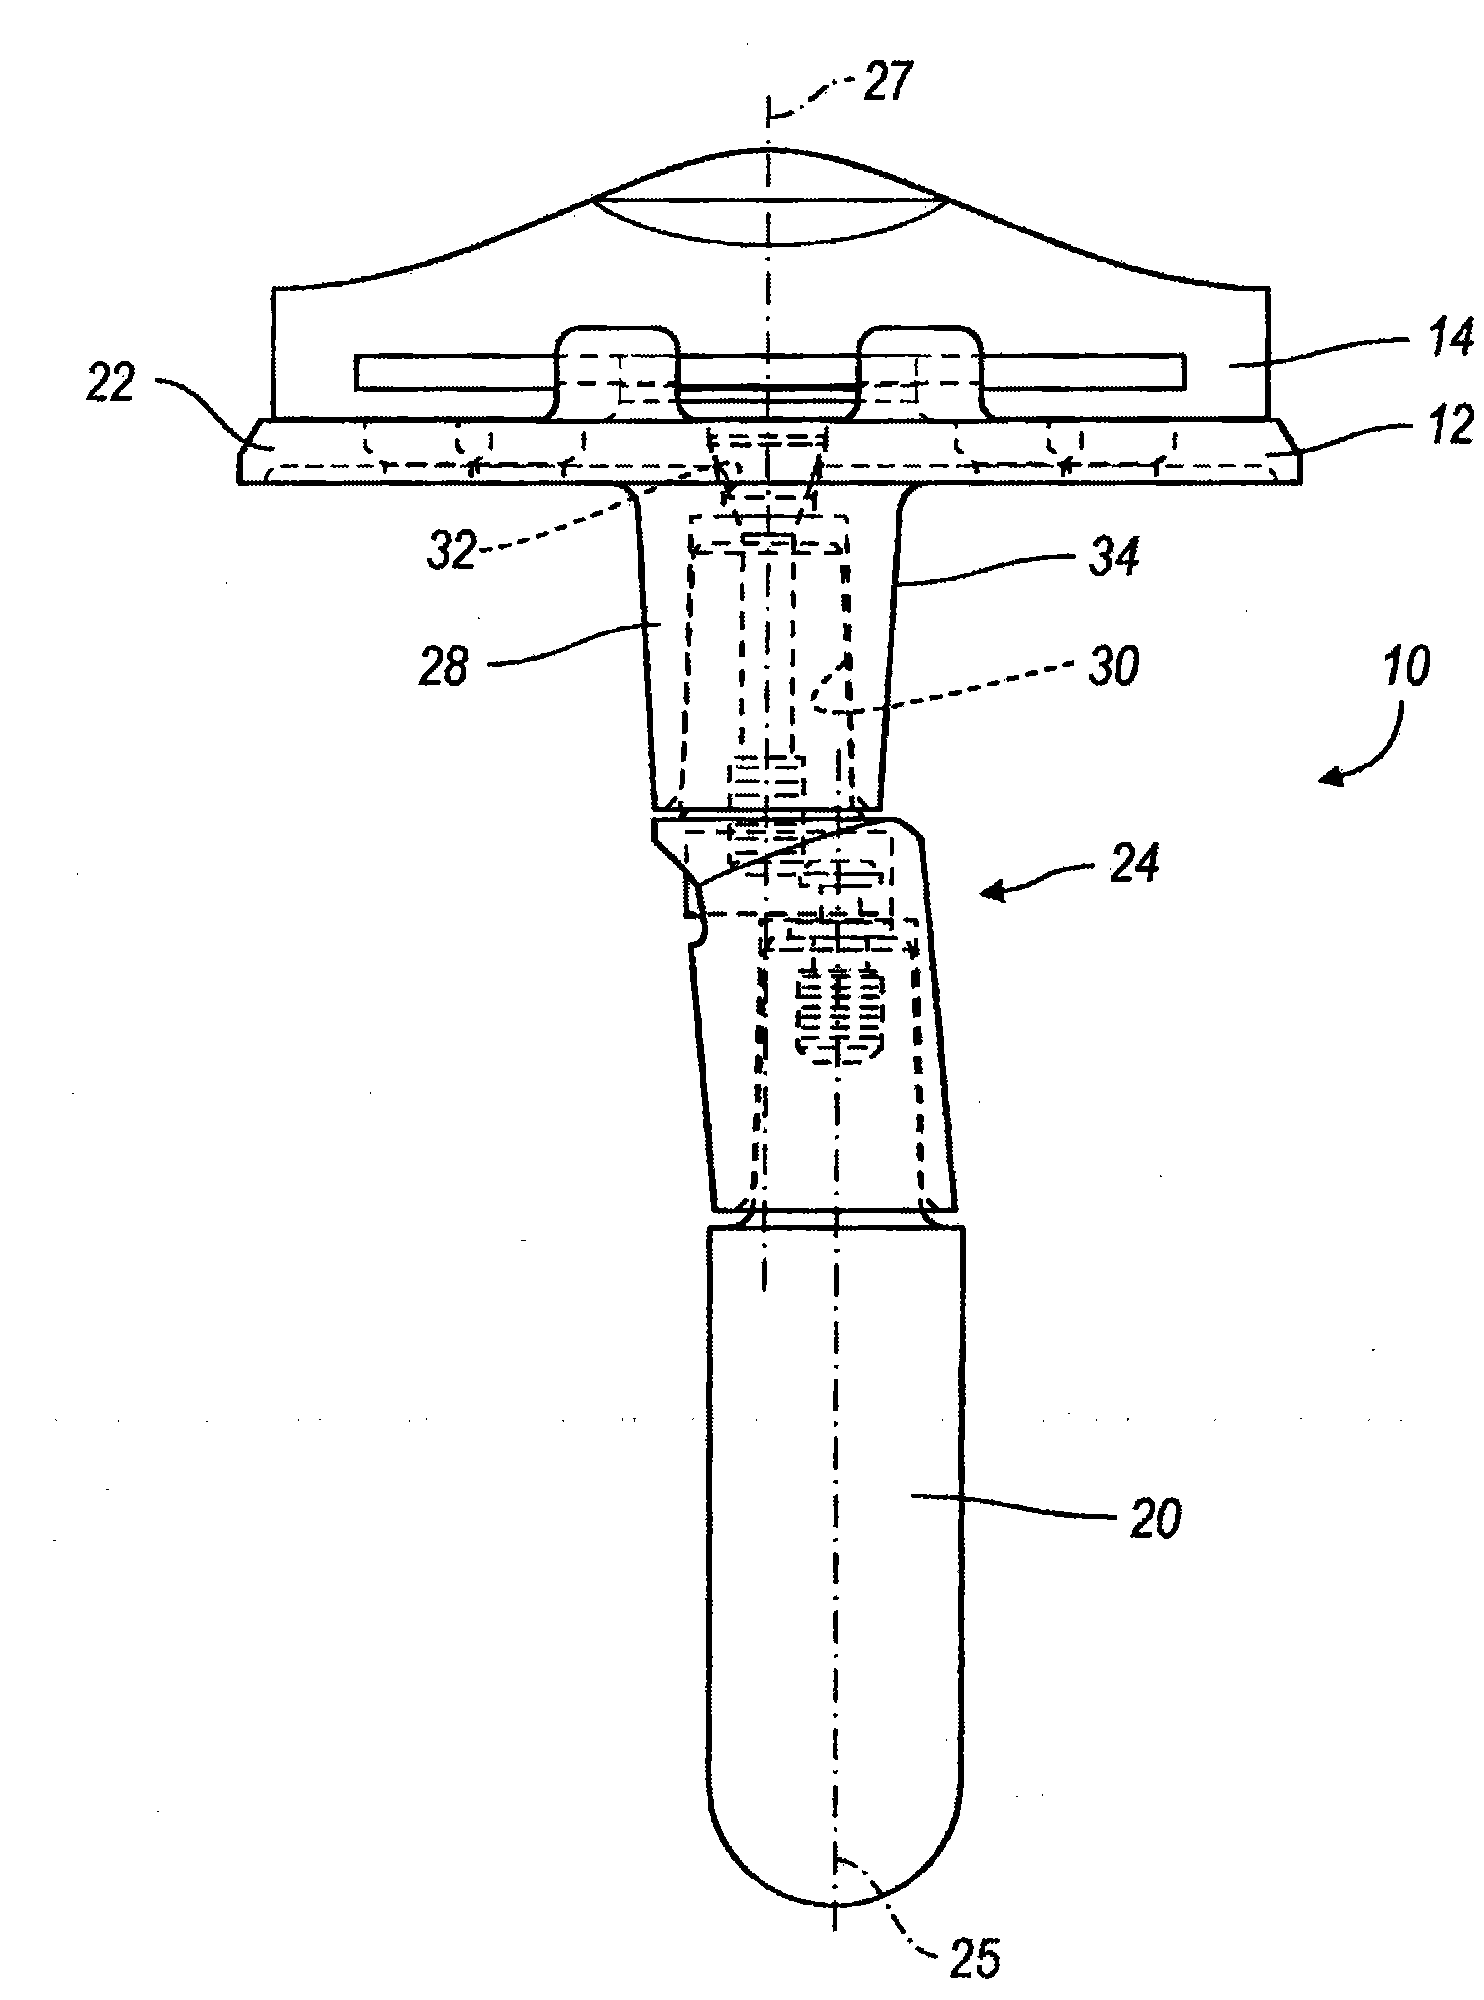 Knee joint prosthesis system and method for implantation